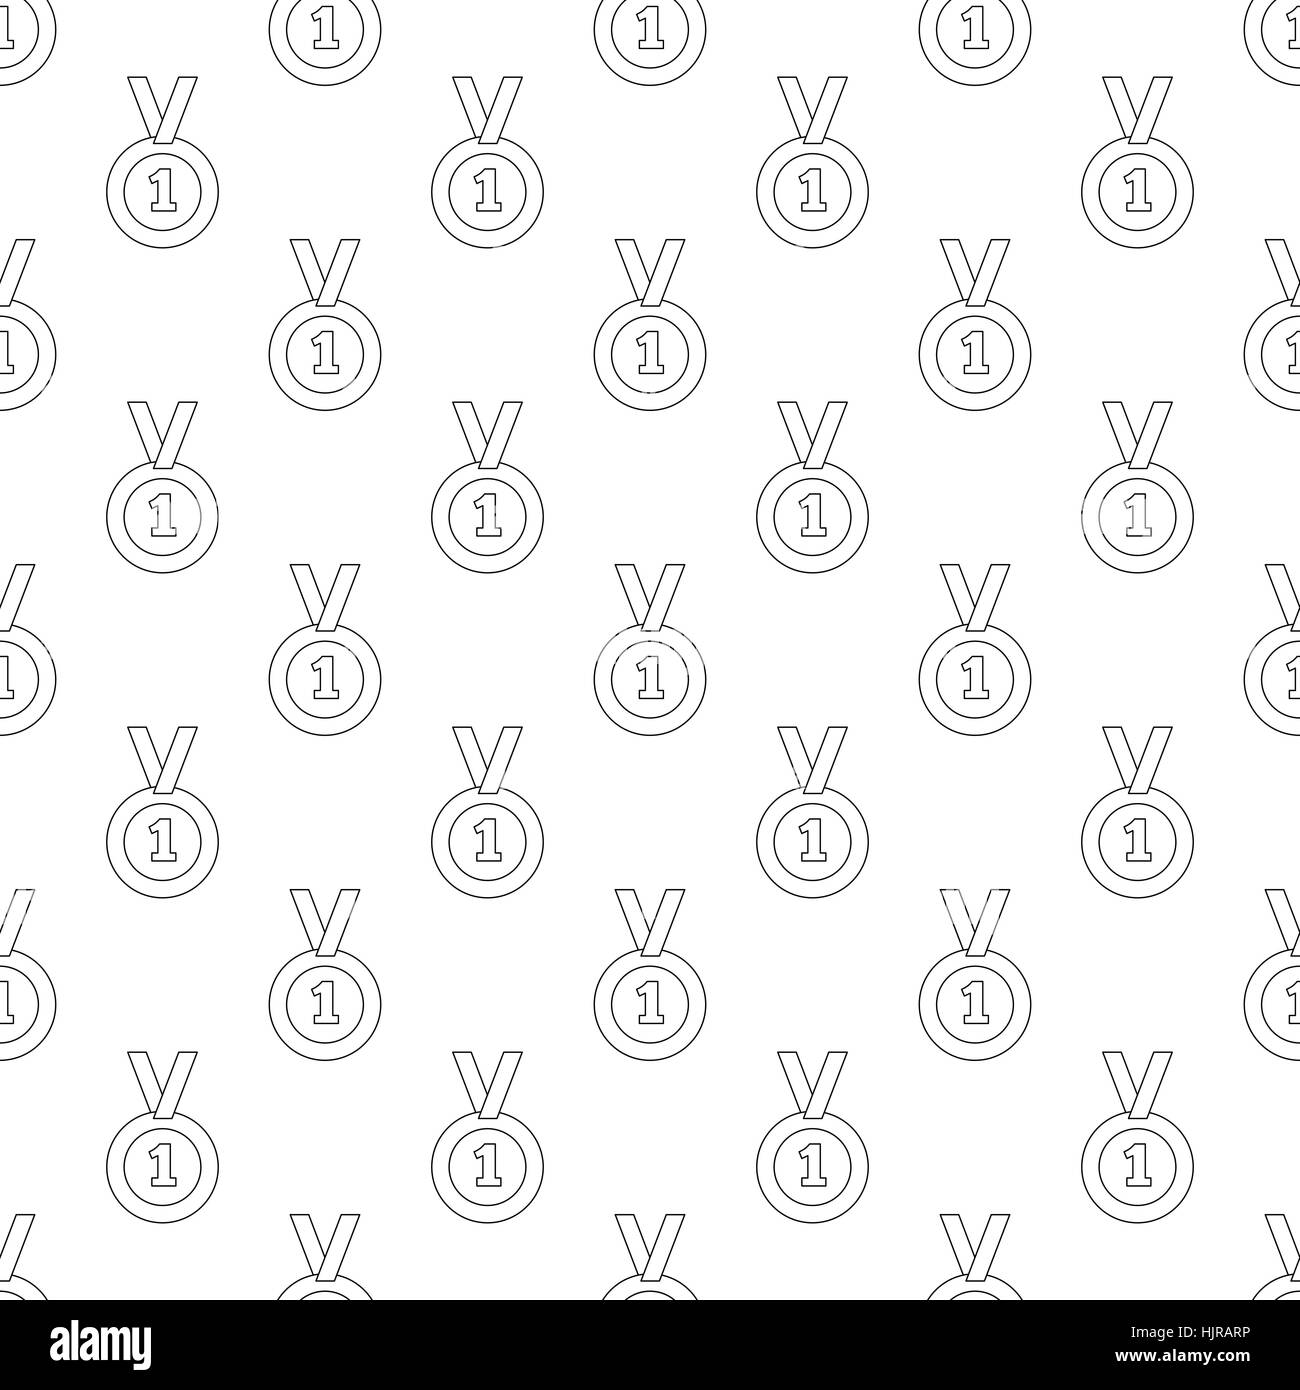 1st place medal pattern seamless black for any design Stock Vector